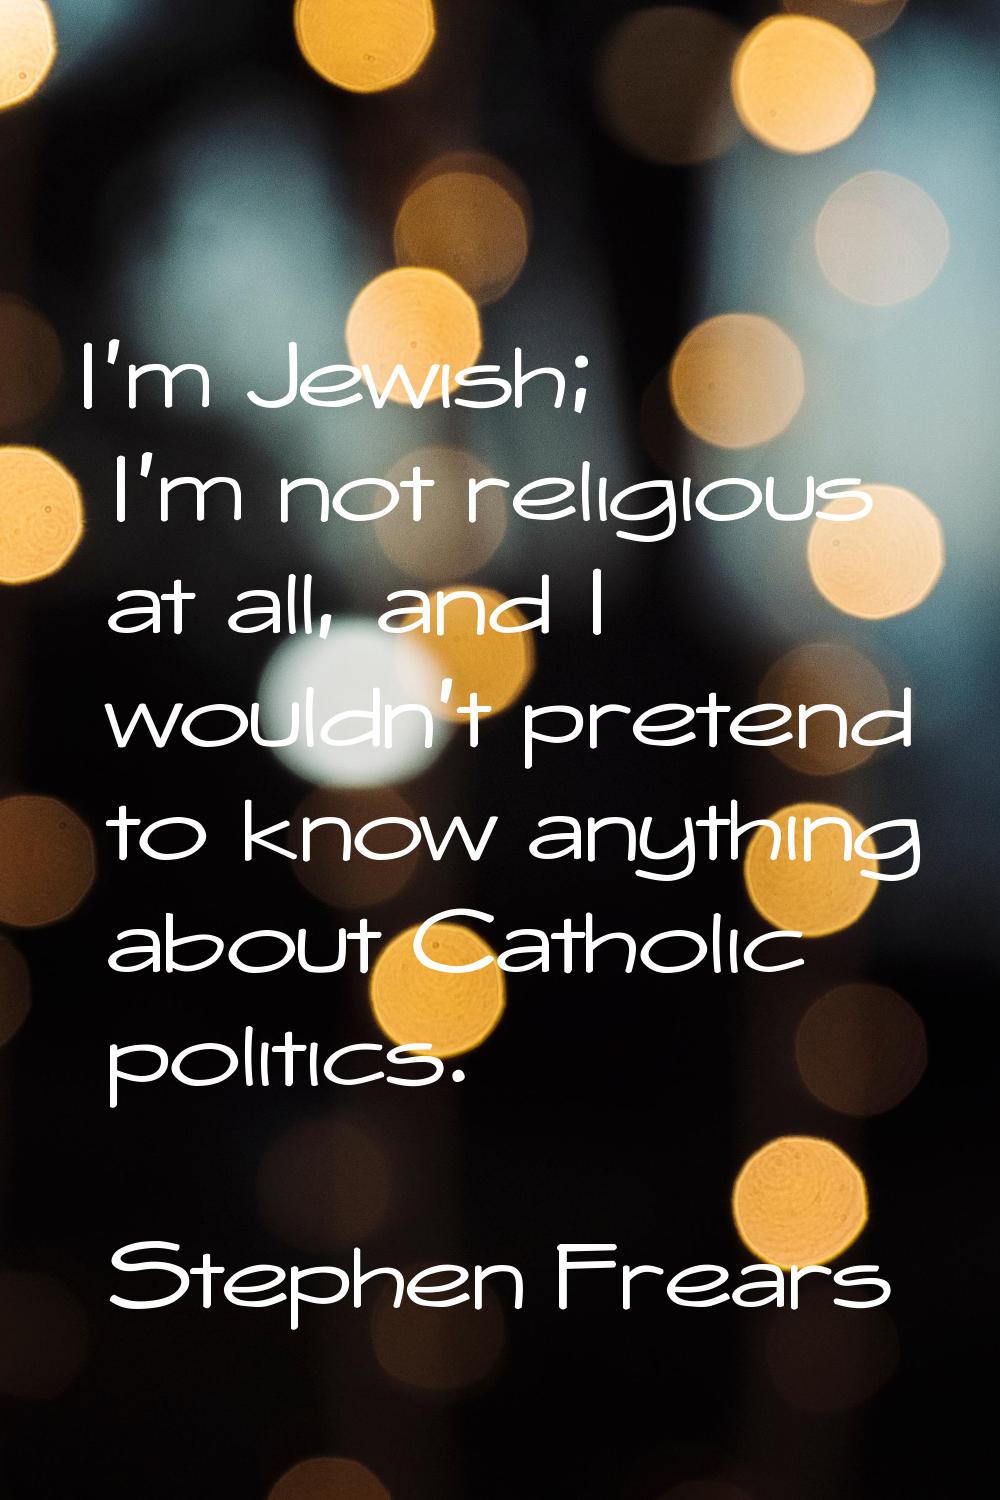 I'm Jewish; I'm not religious at all, and I wouldn't pretend to know anything about Catholic politi